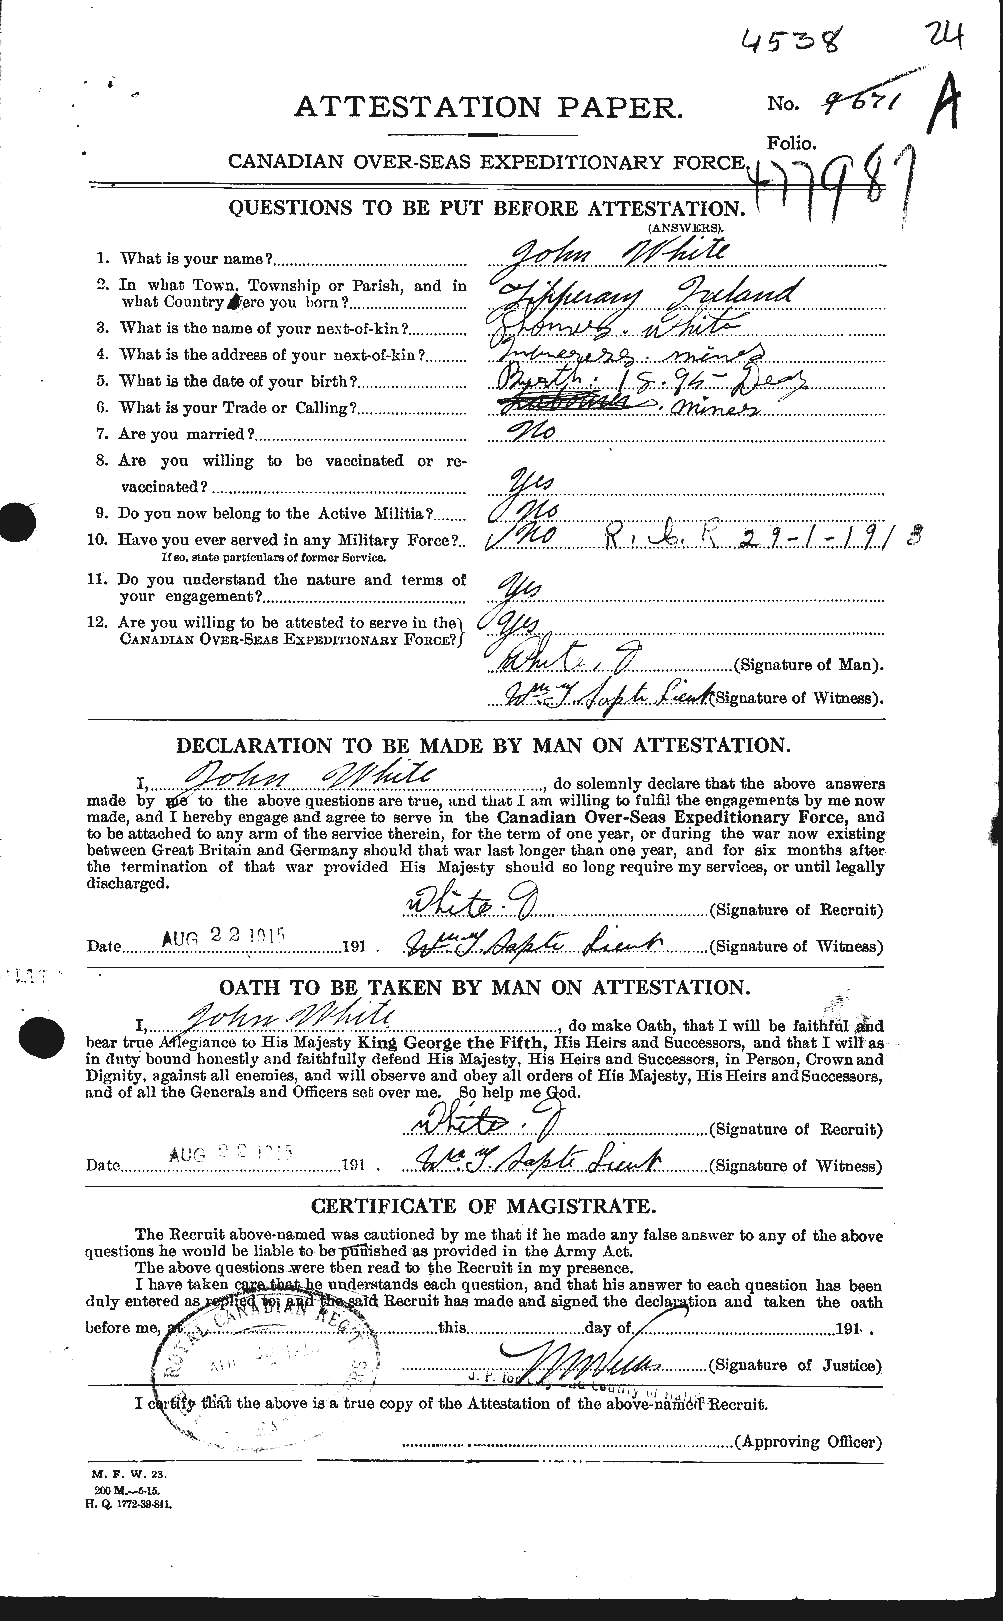 Personnel Records of the First World War - CEF 671523a